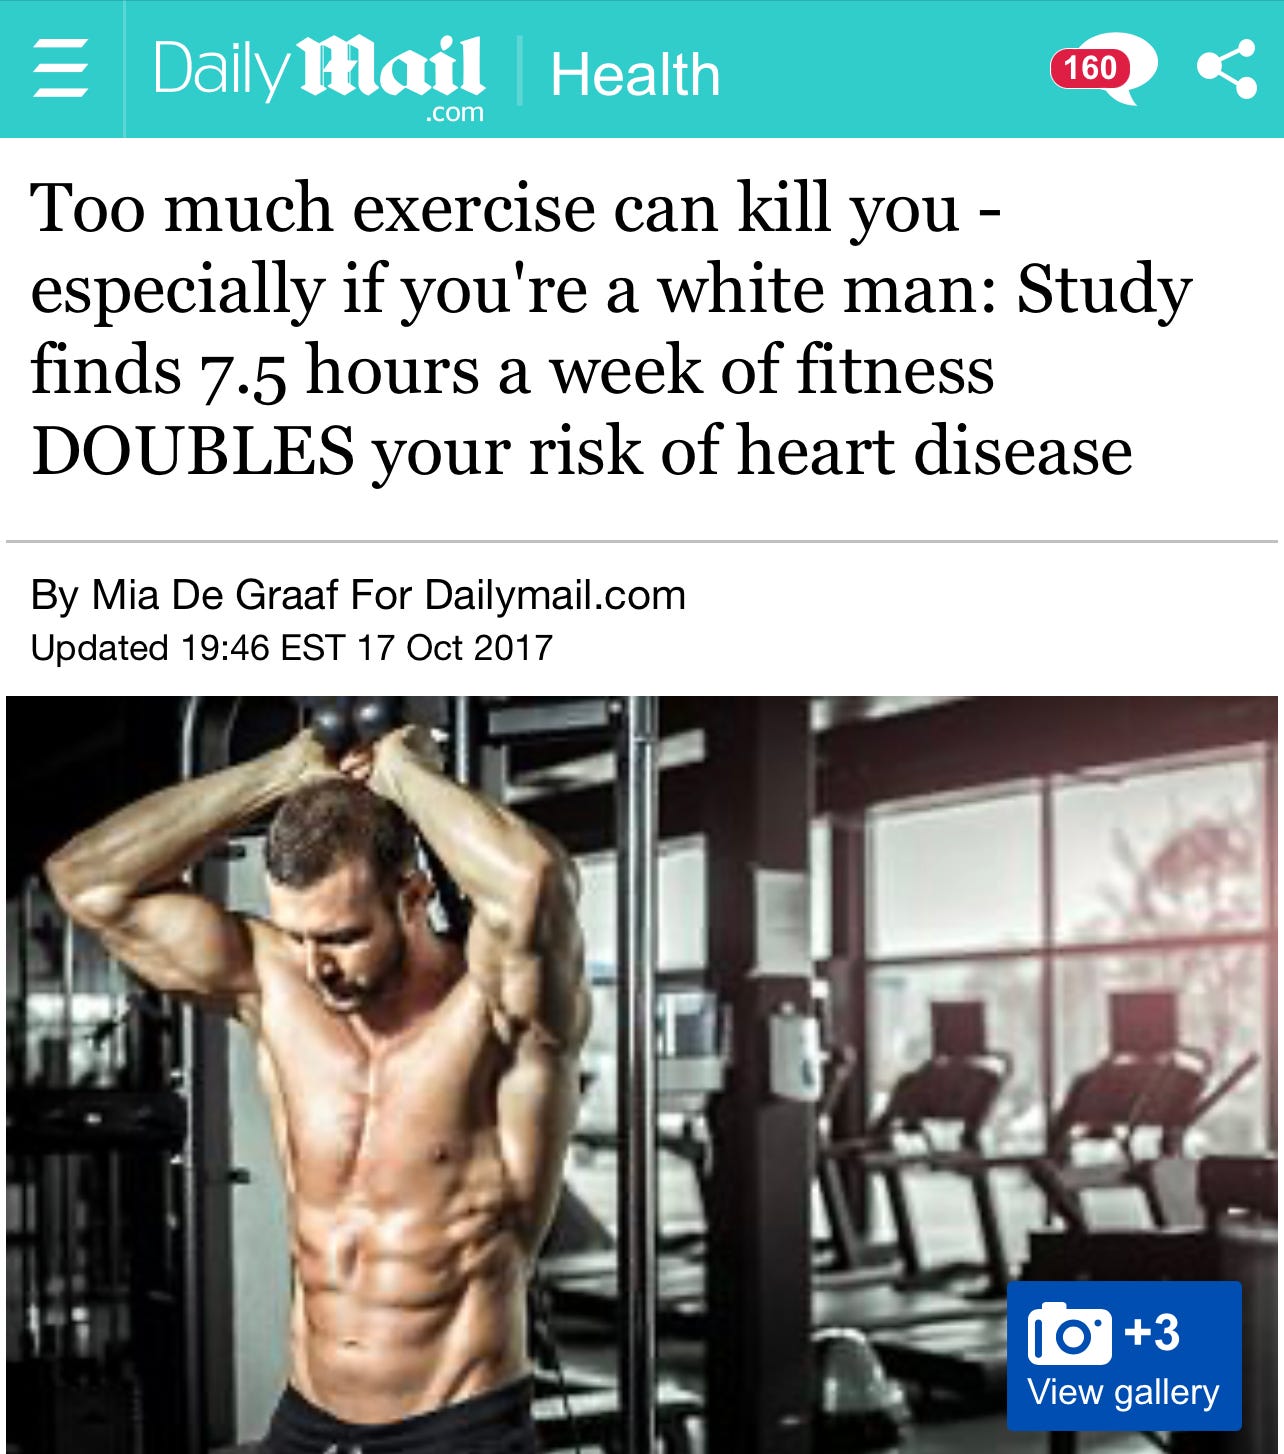 May be an image of 1 person and text that says "Daily Mail .com Health 160 Too much exercise can kill you- especially if you're a white man: Study finds 7.5 hours a week of fitness DOUBLES your risk of heart disease By Mia De Graaf For Dailymail.com Updated 19:46 EST 17 Oct 2017 +3 View gallery"